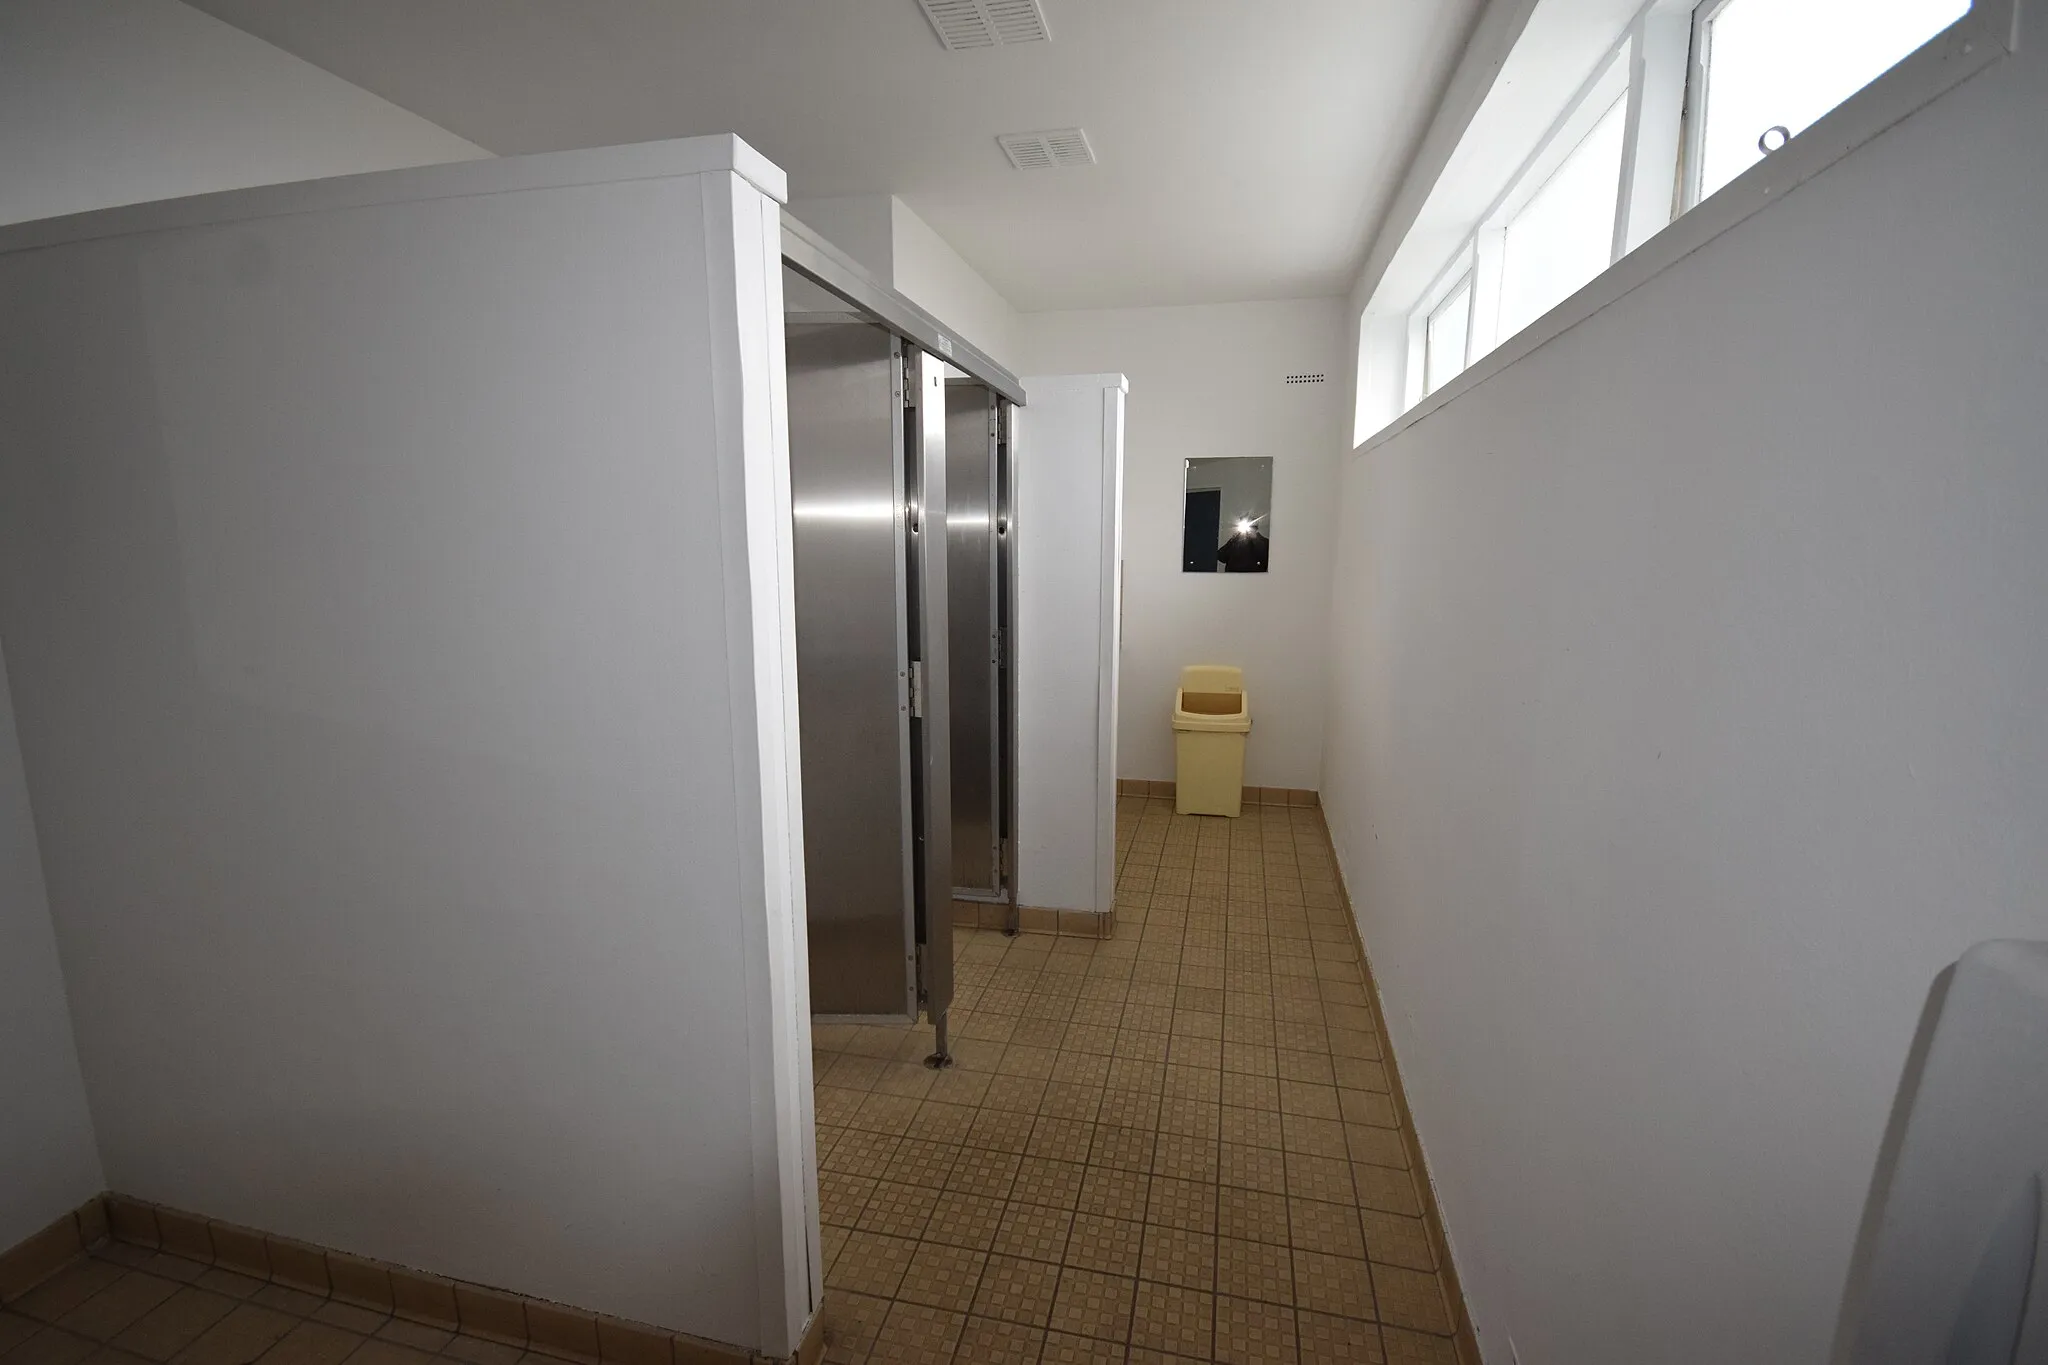 Photo showing: Inside the women's toilet at Staxton Hill